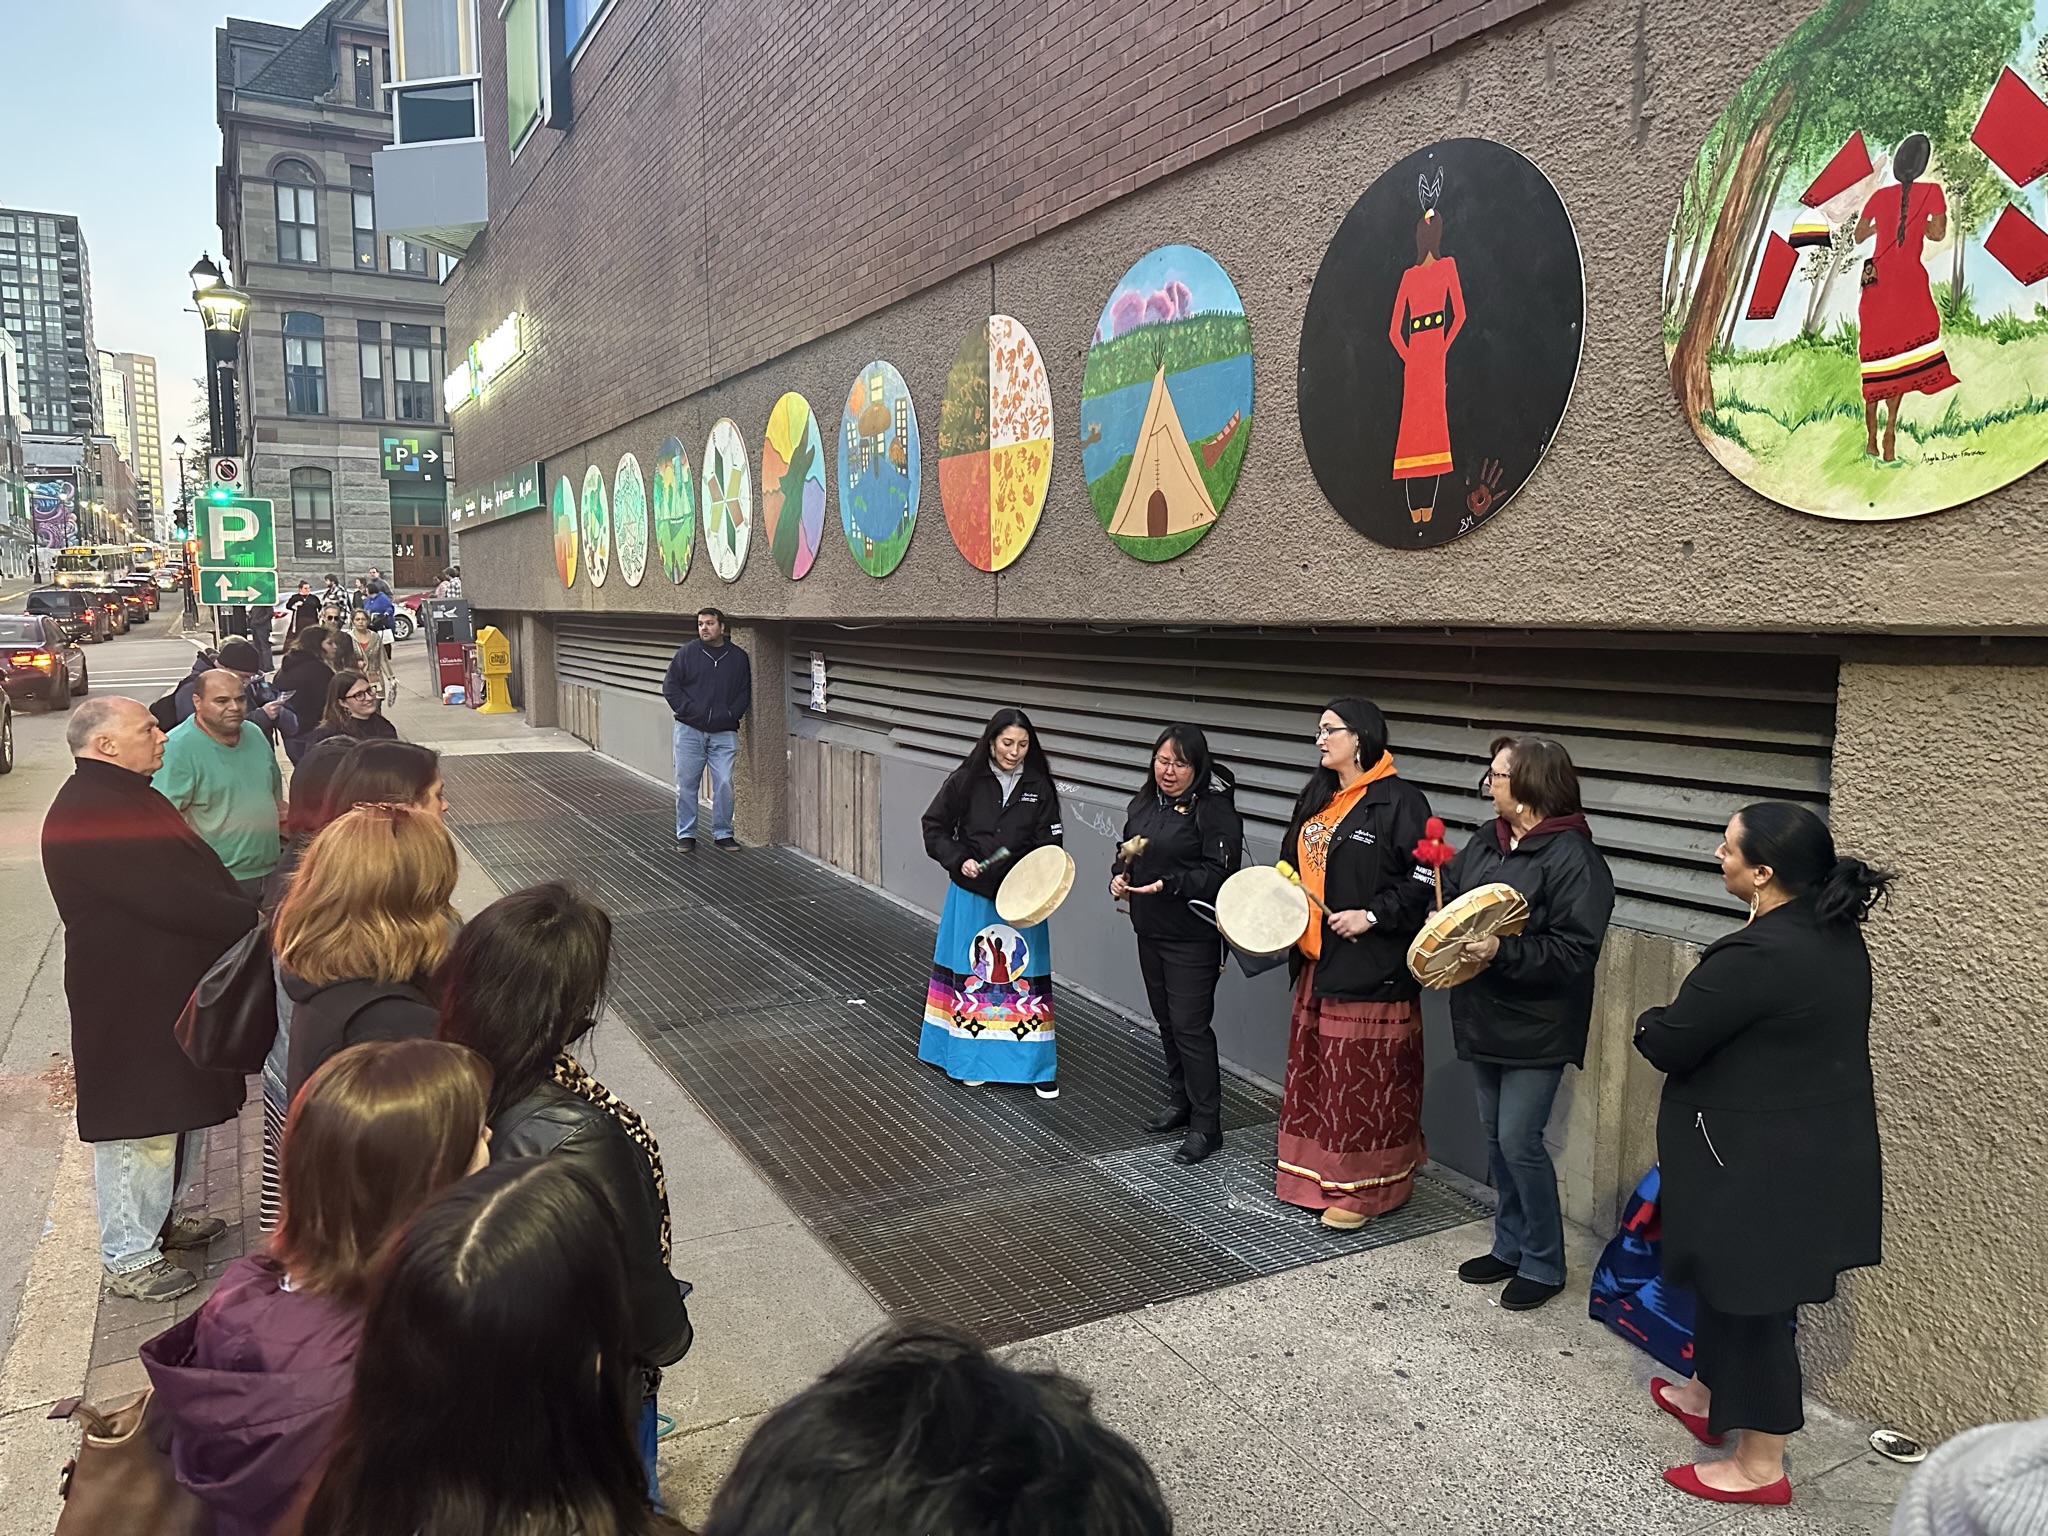 A crowd is gathered around the Our Stories murals on Barrington Street. People perform Indigenous traditions in front of the murals.